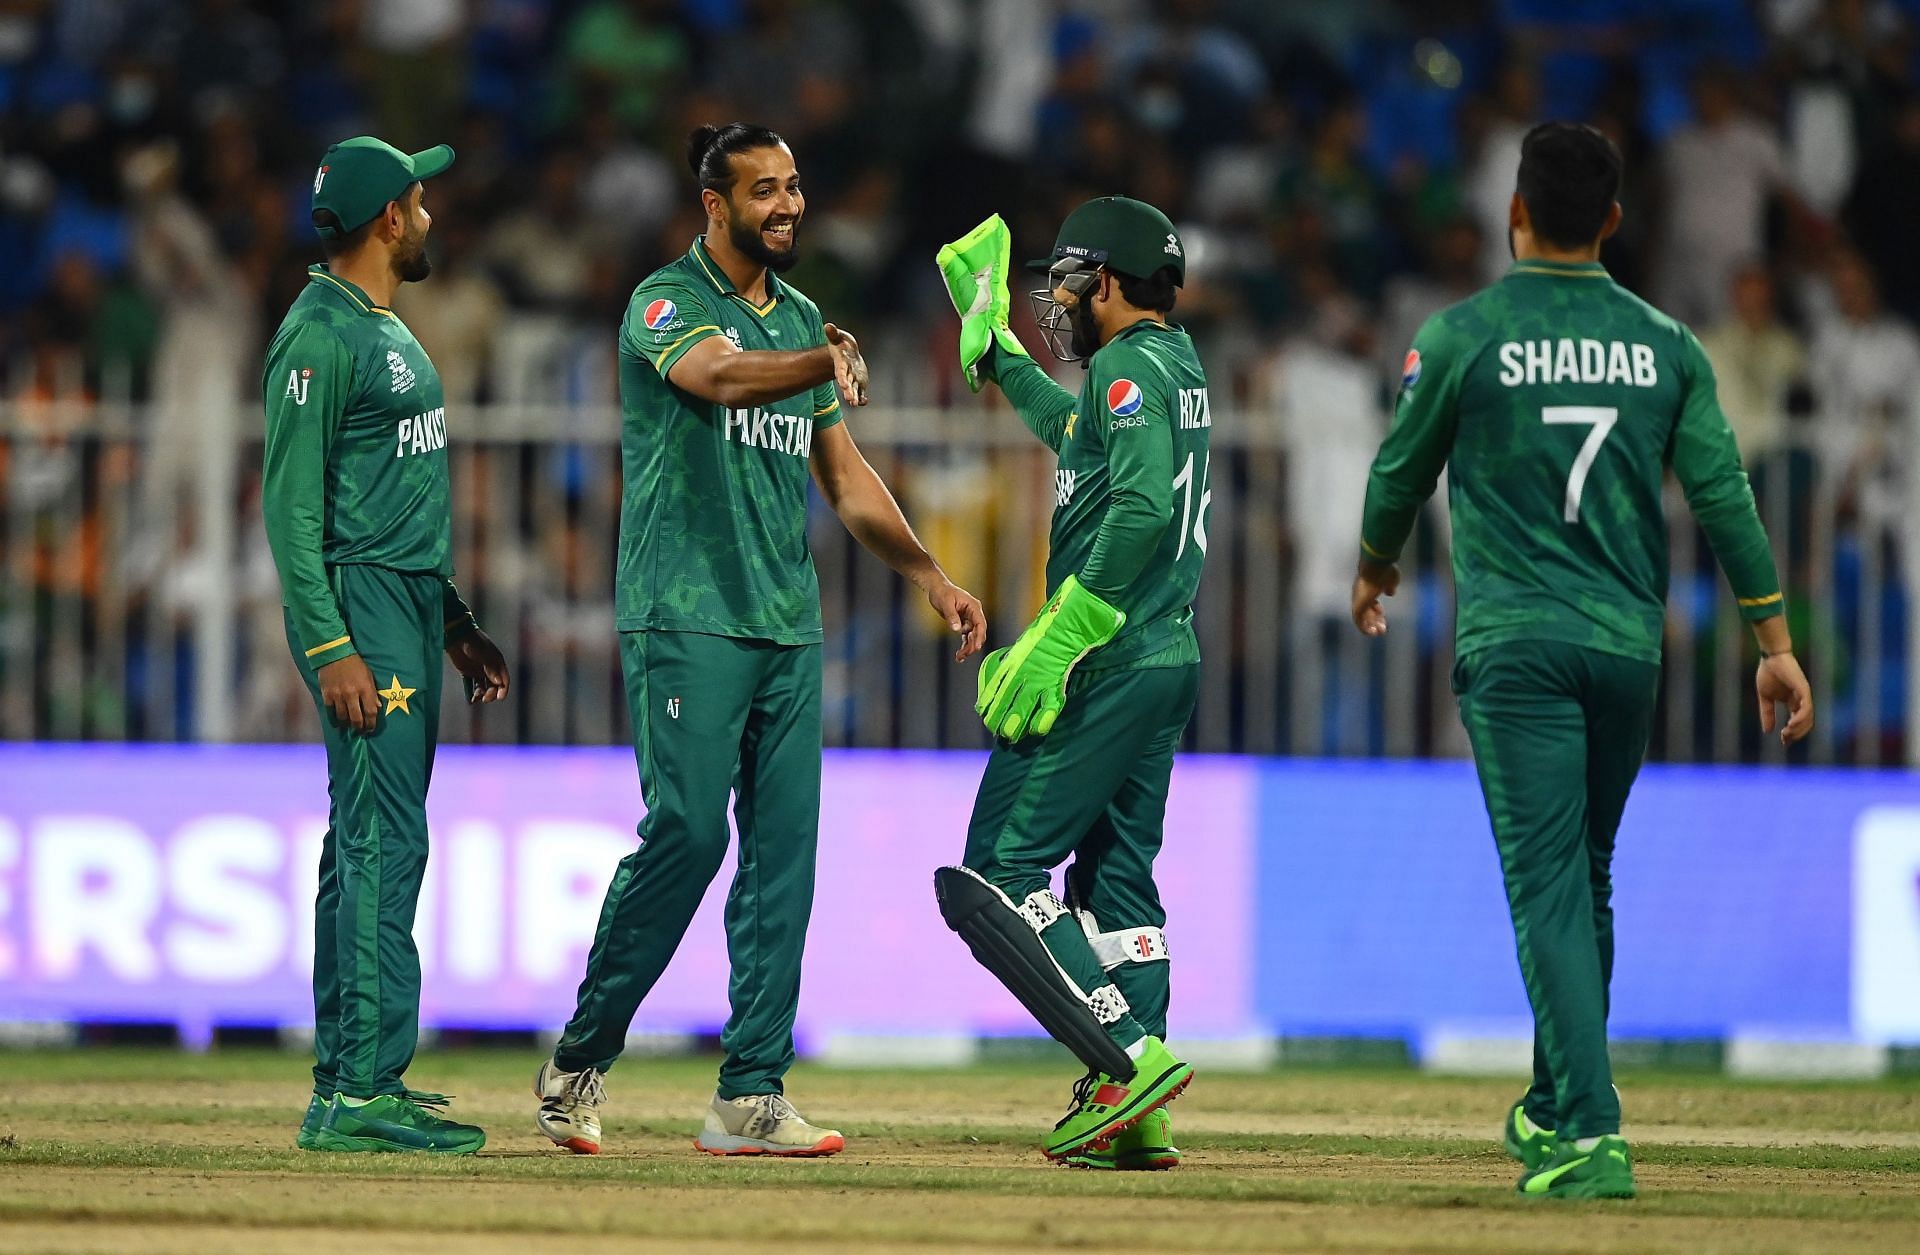 Pakistan are the only unbeaten team in the ICC T20 World Cup 2021